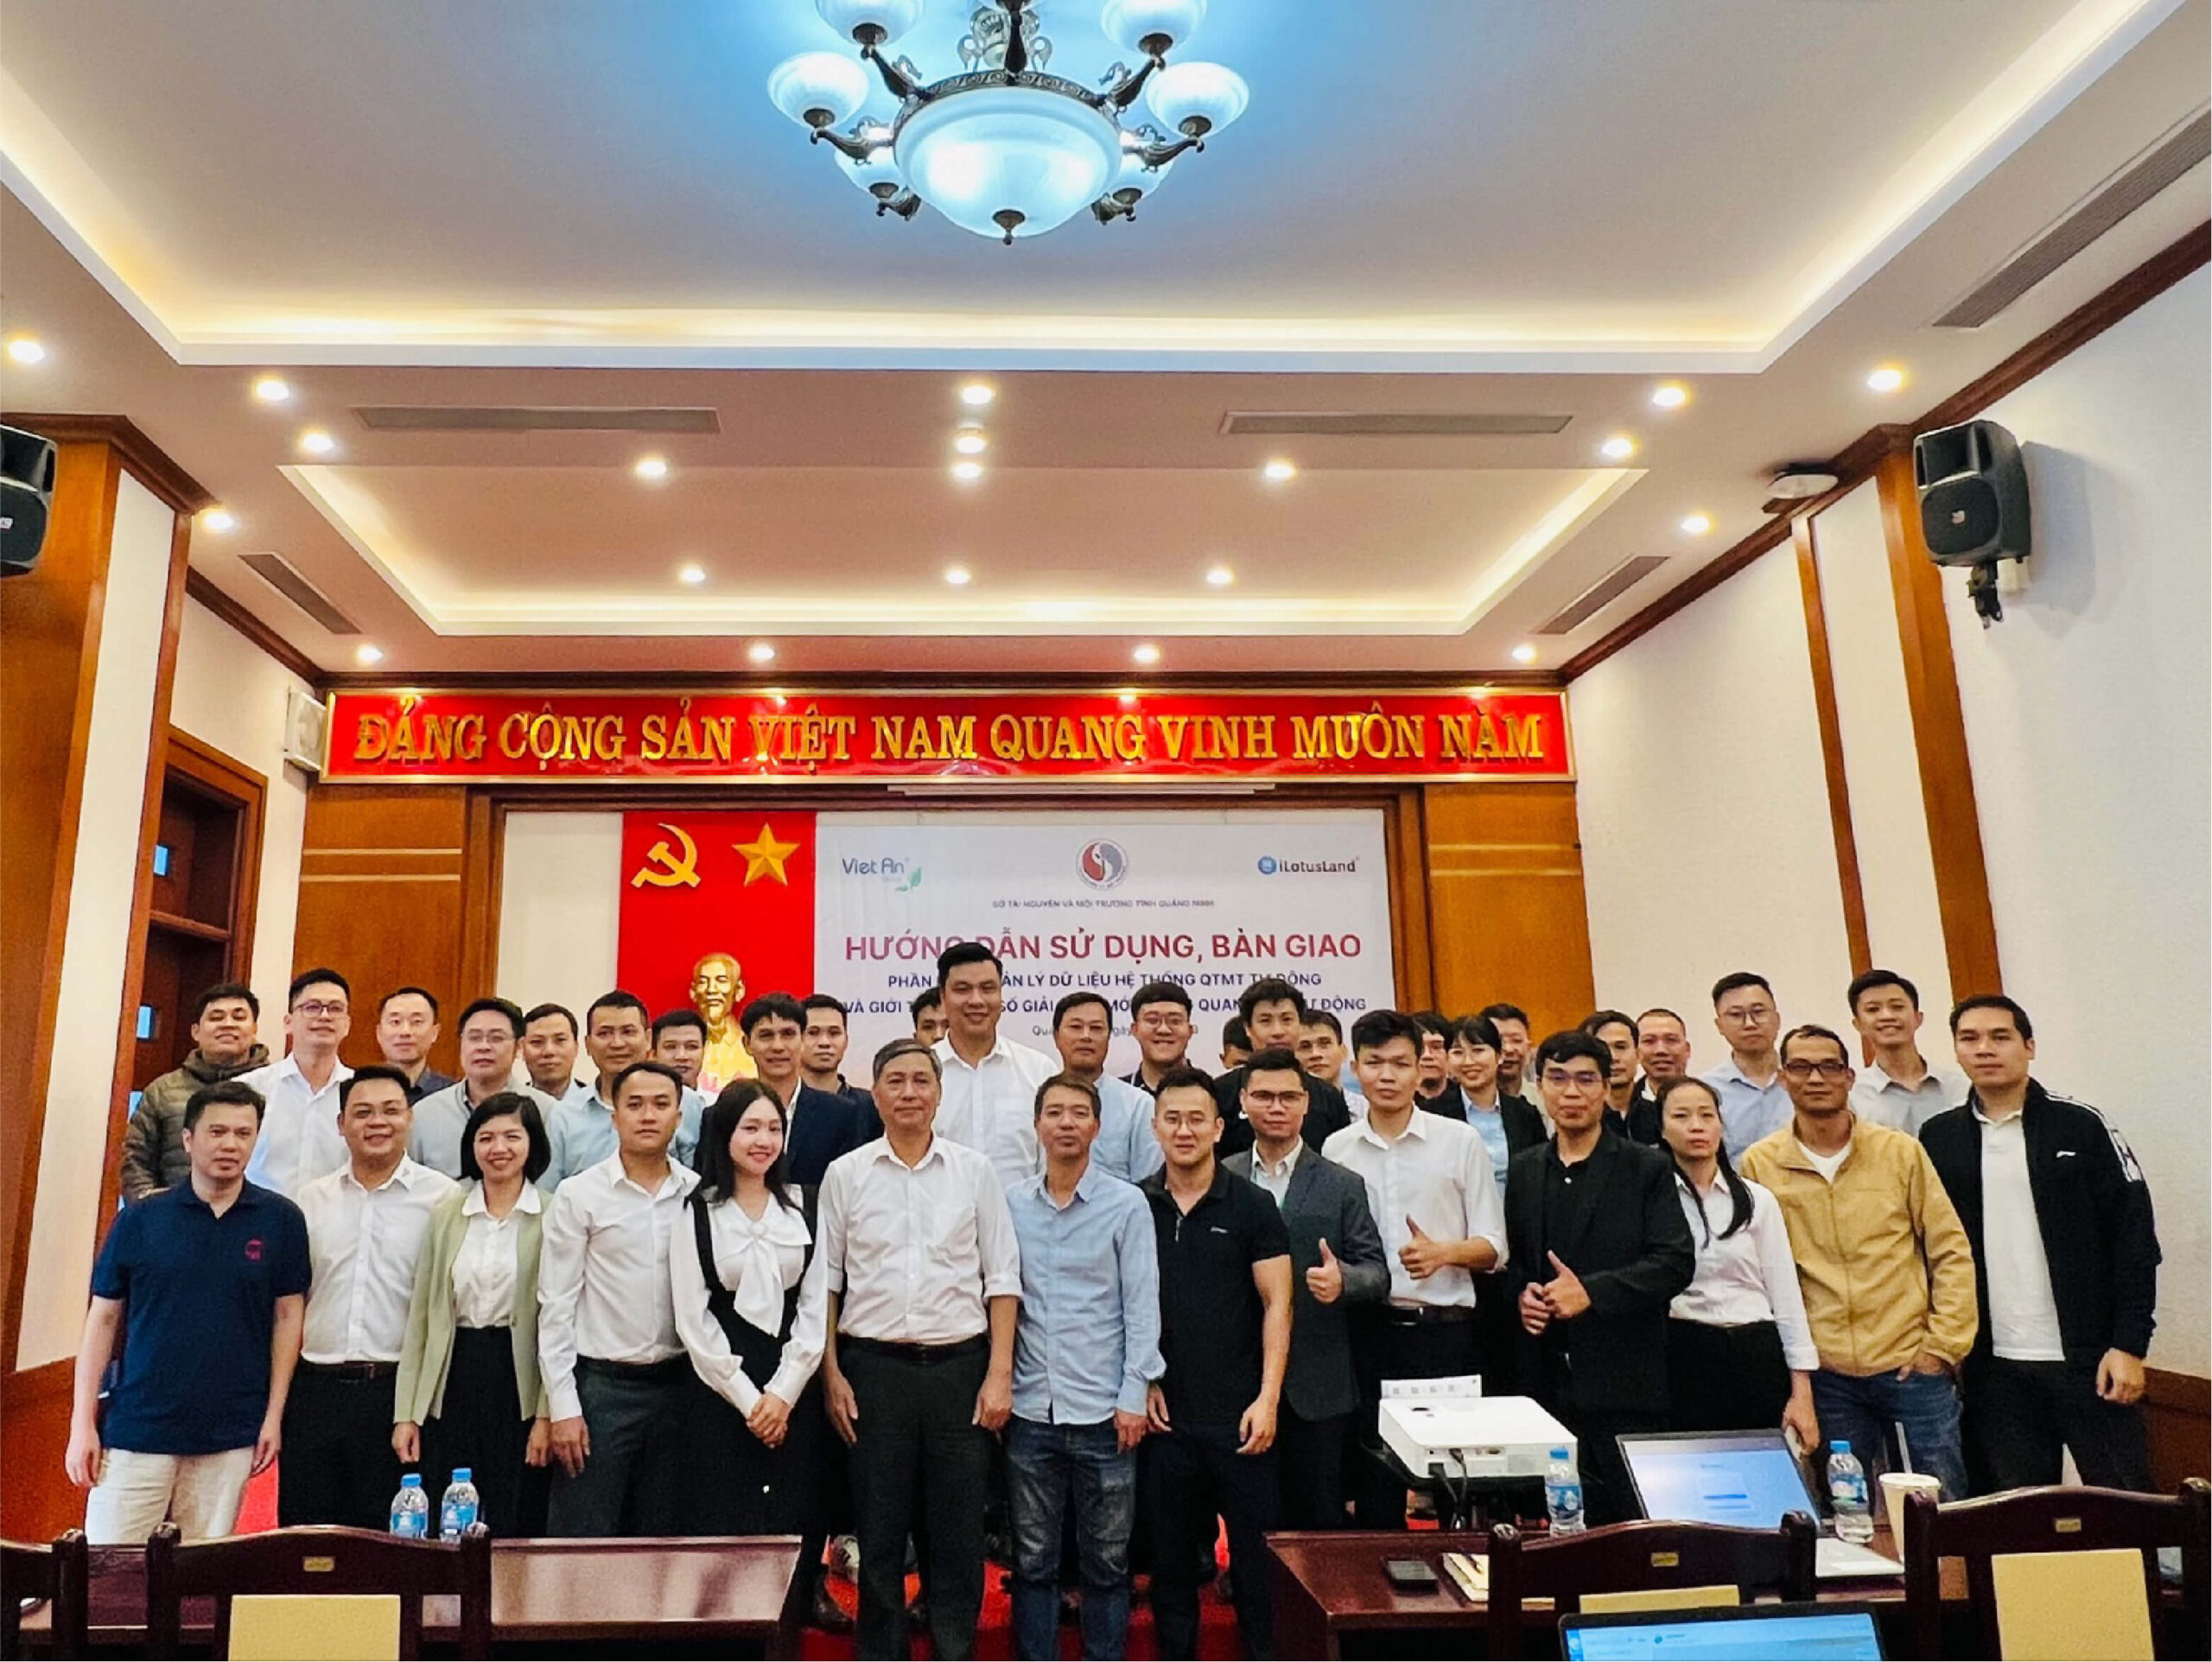 Handing over automatic environmental management software to Quang Ninh province